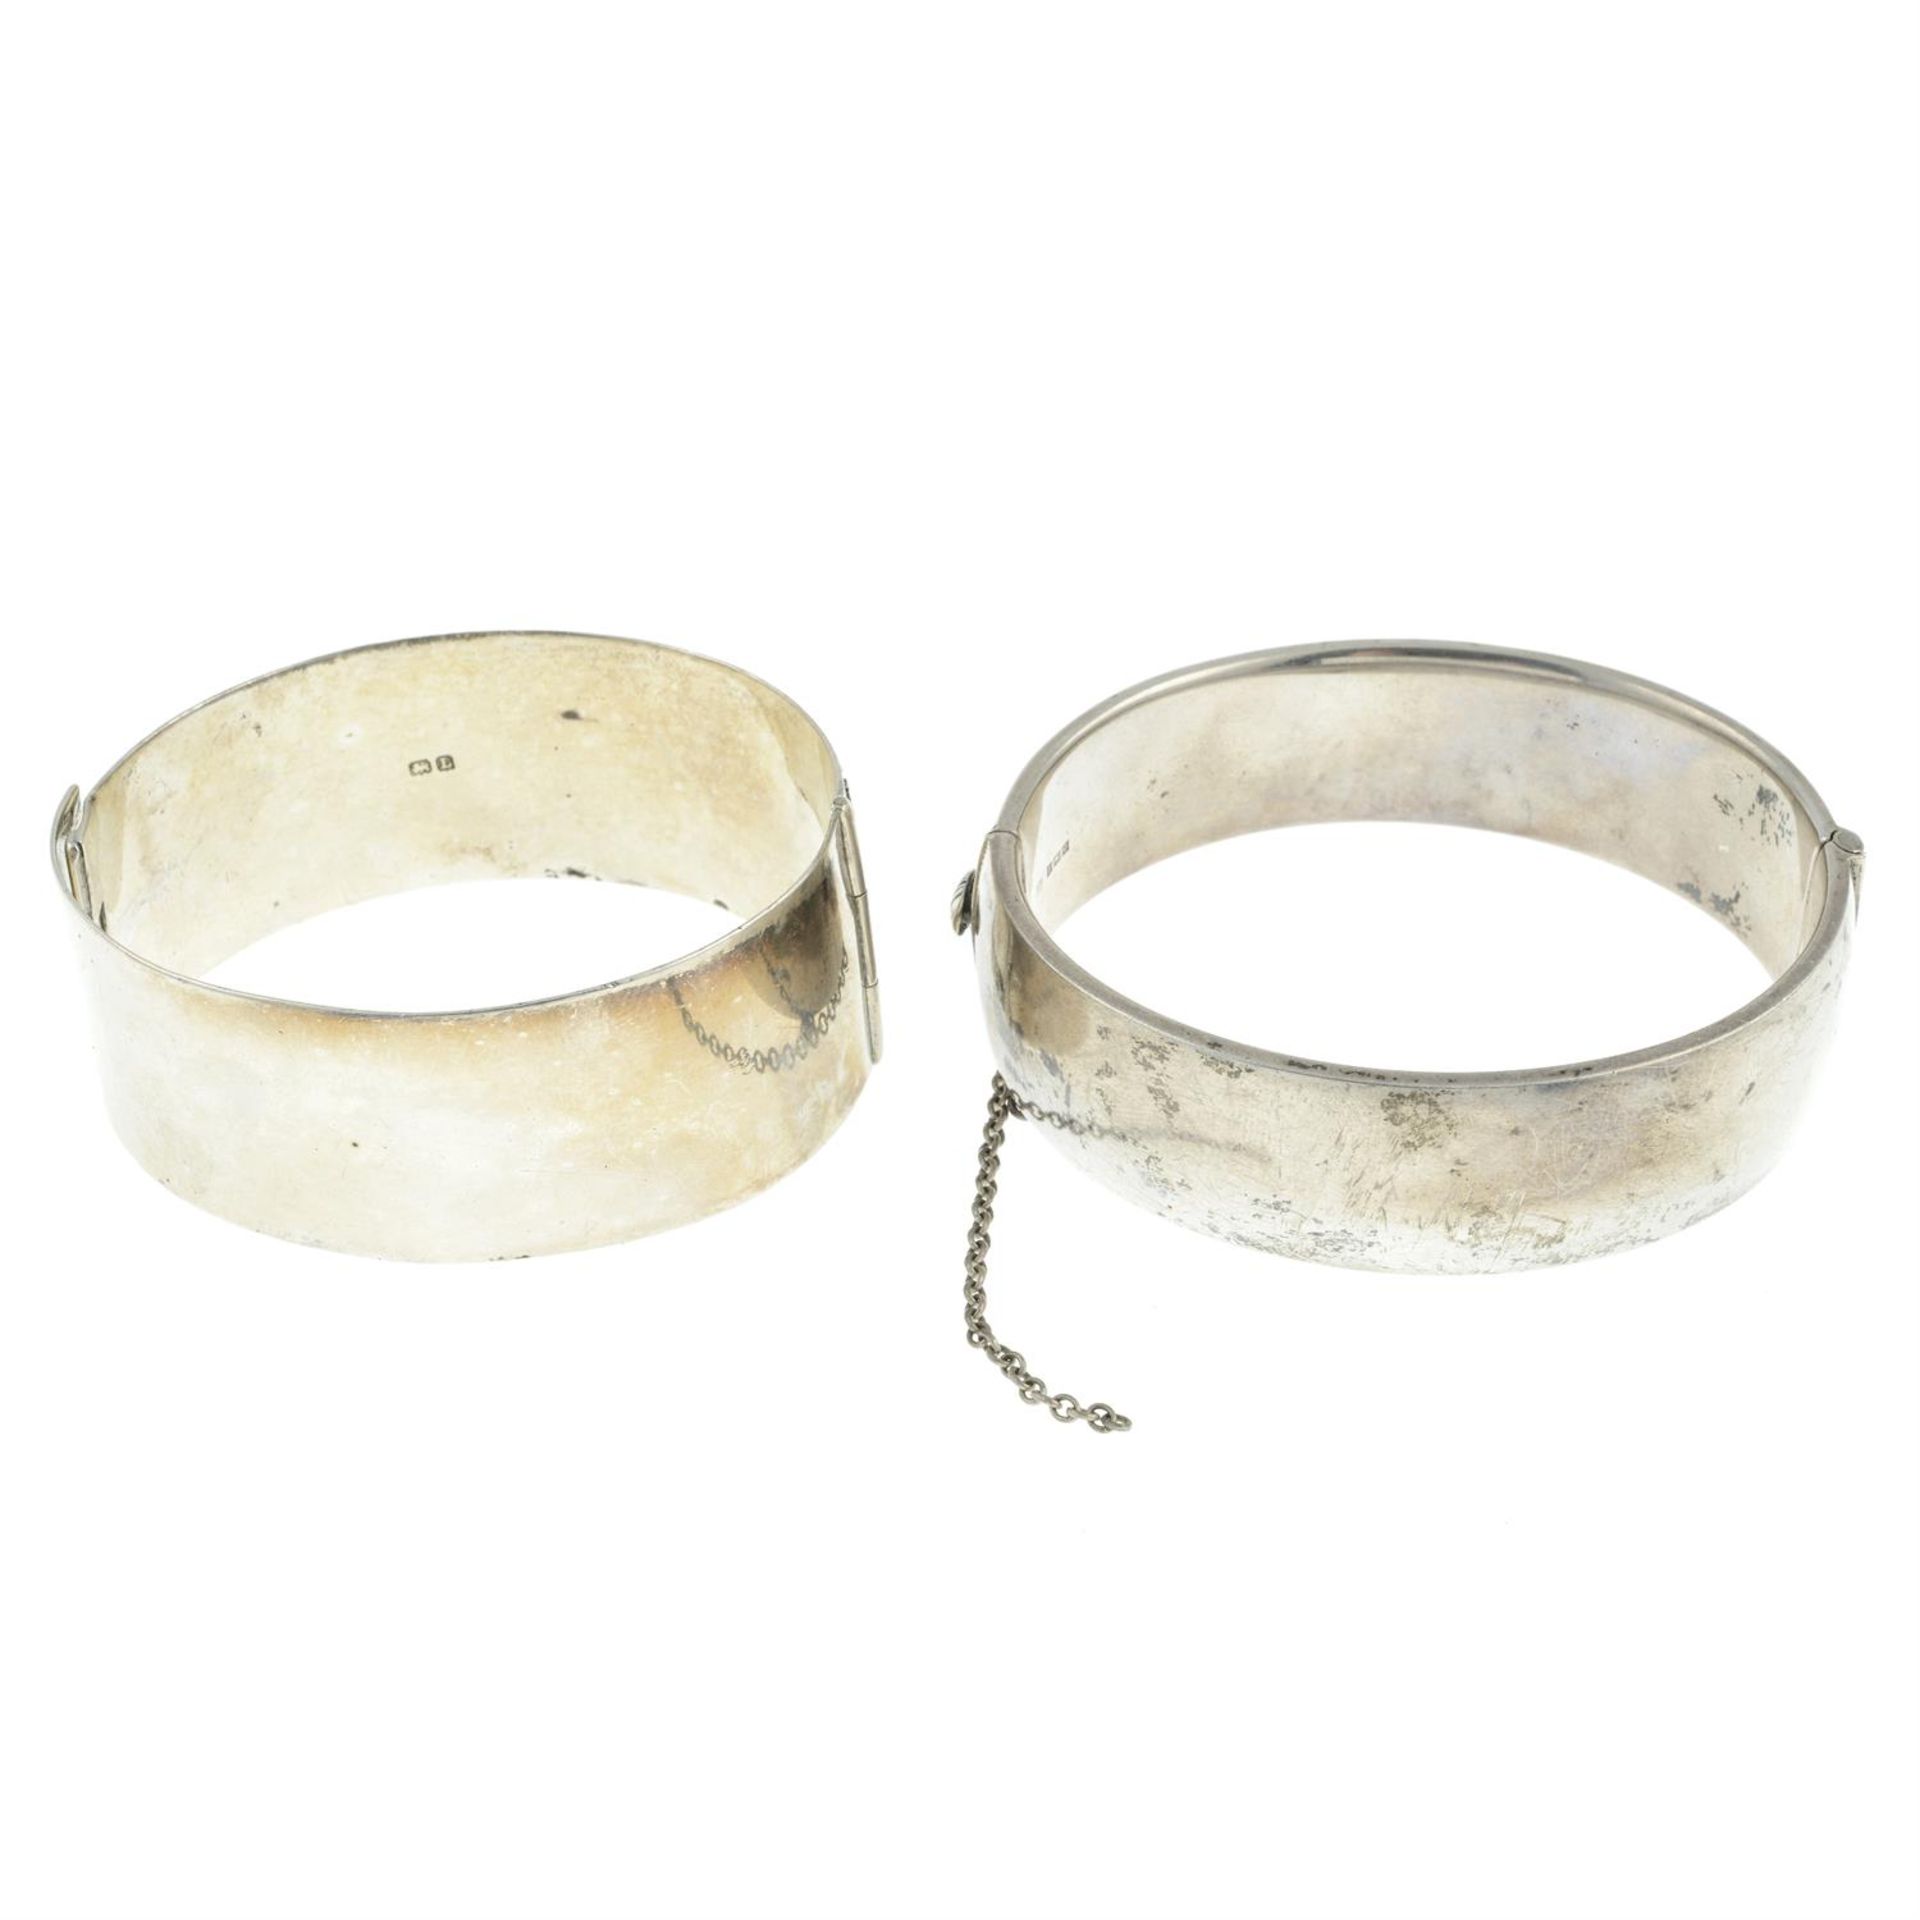 Two mid 20th century silver bangles. - Image 2 of 2